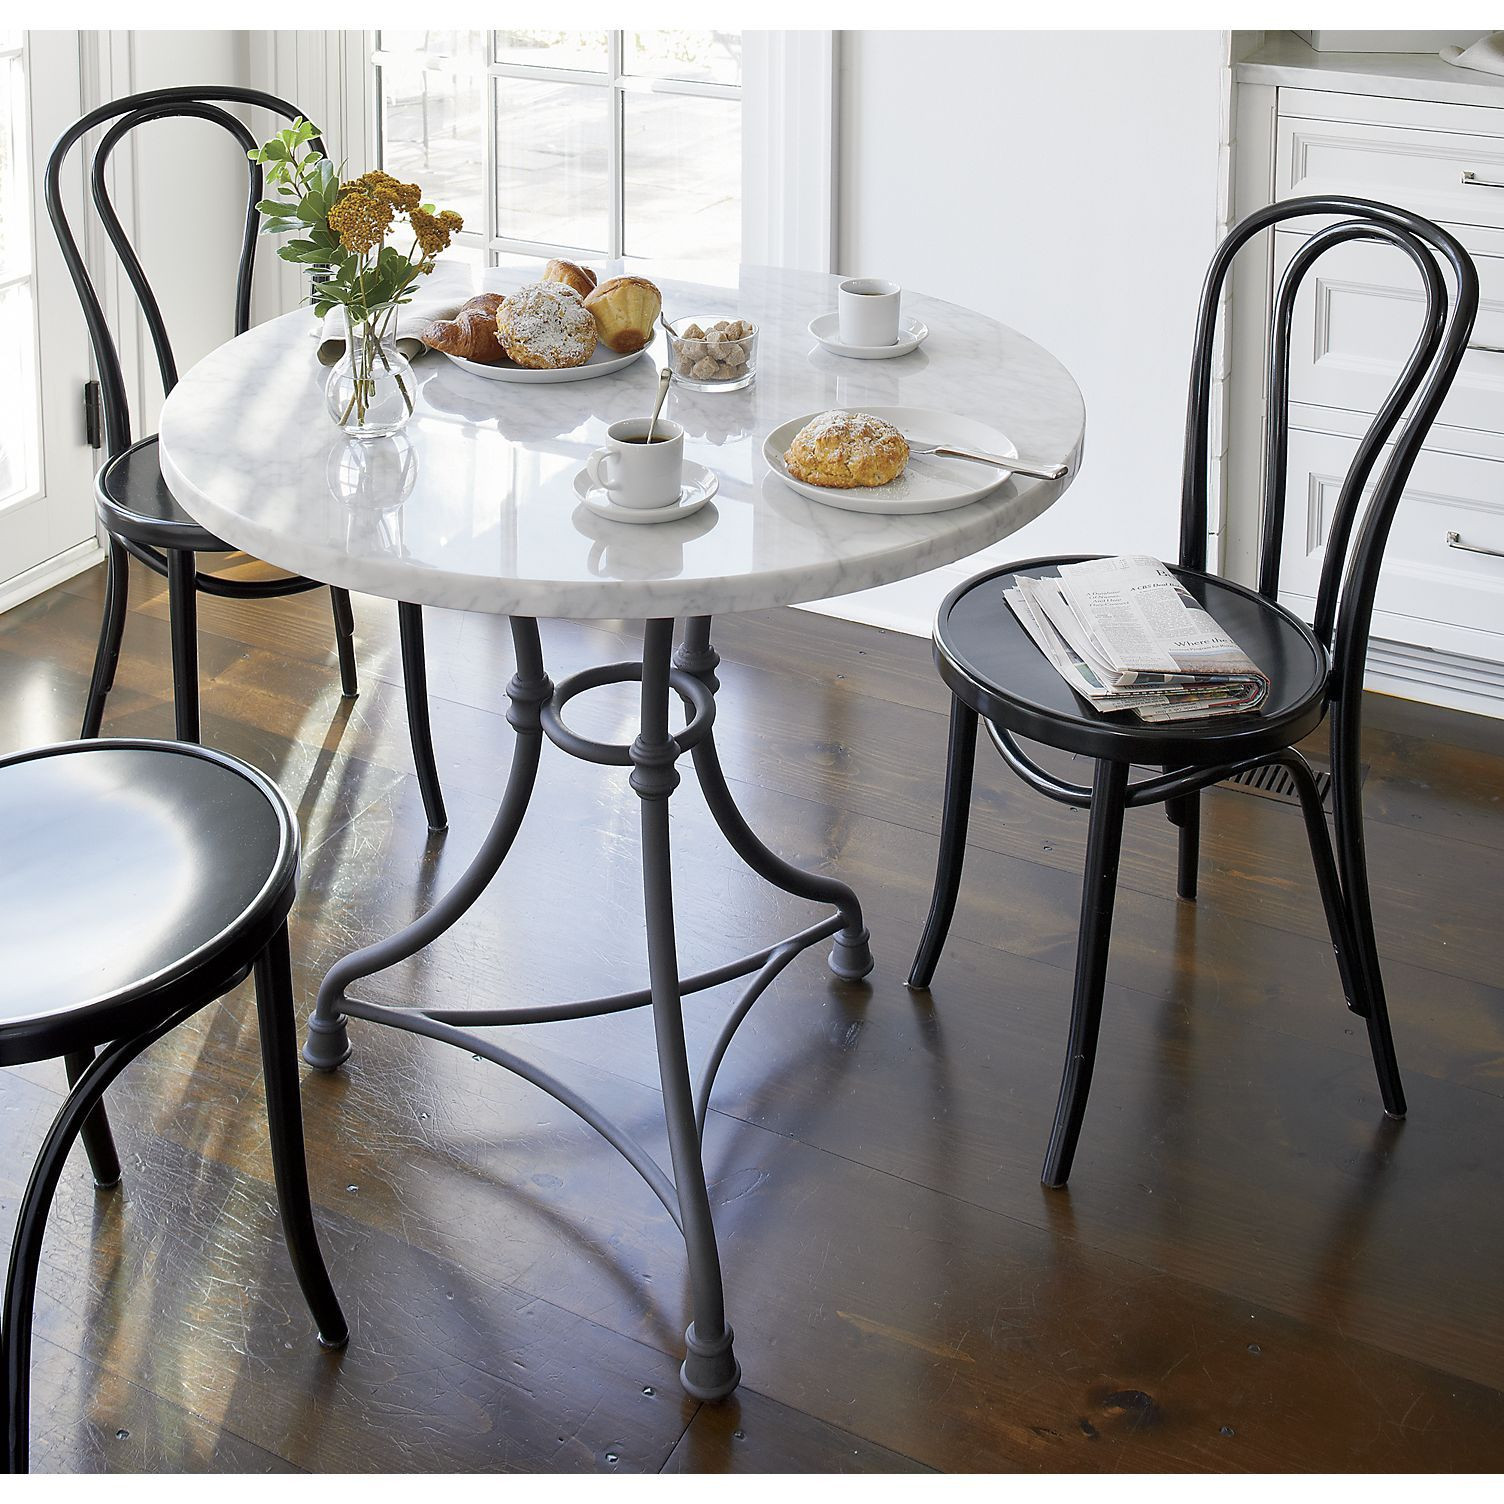 Small Bistro Tables For Kitchen
 French Kitchen Round Bistro Table